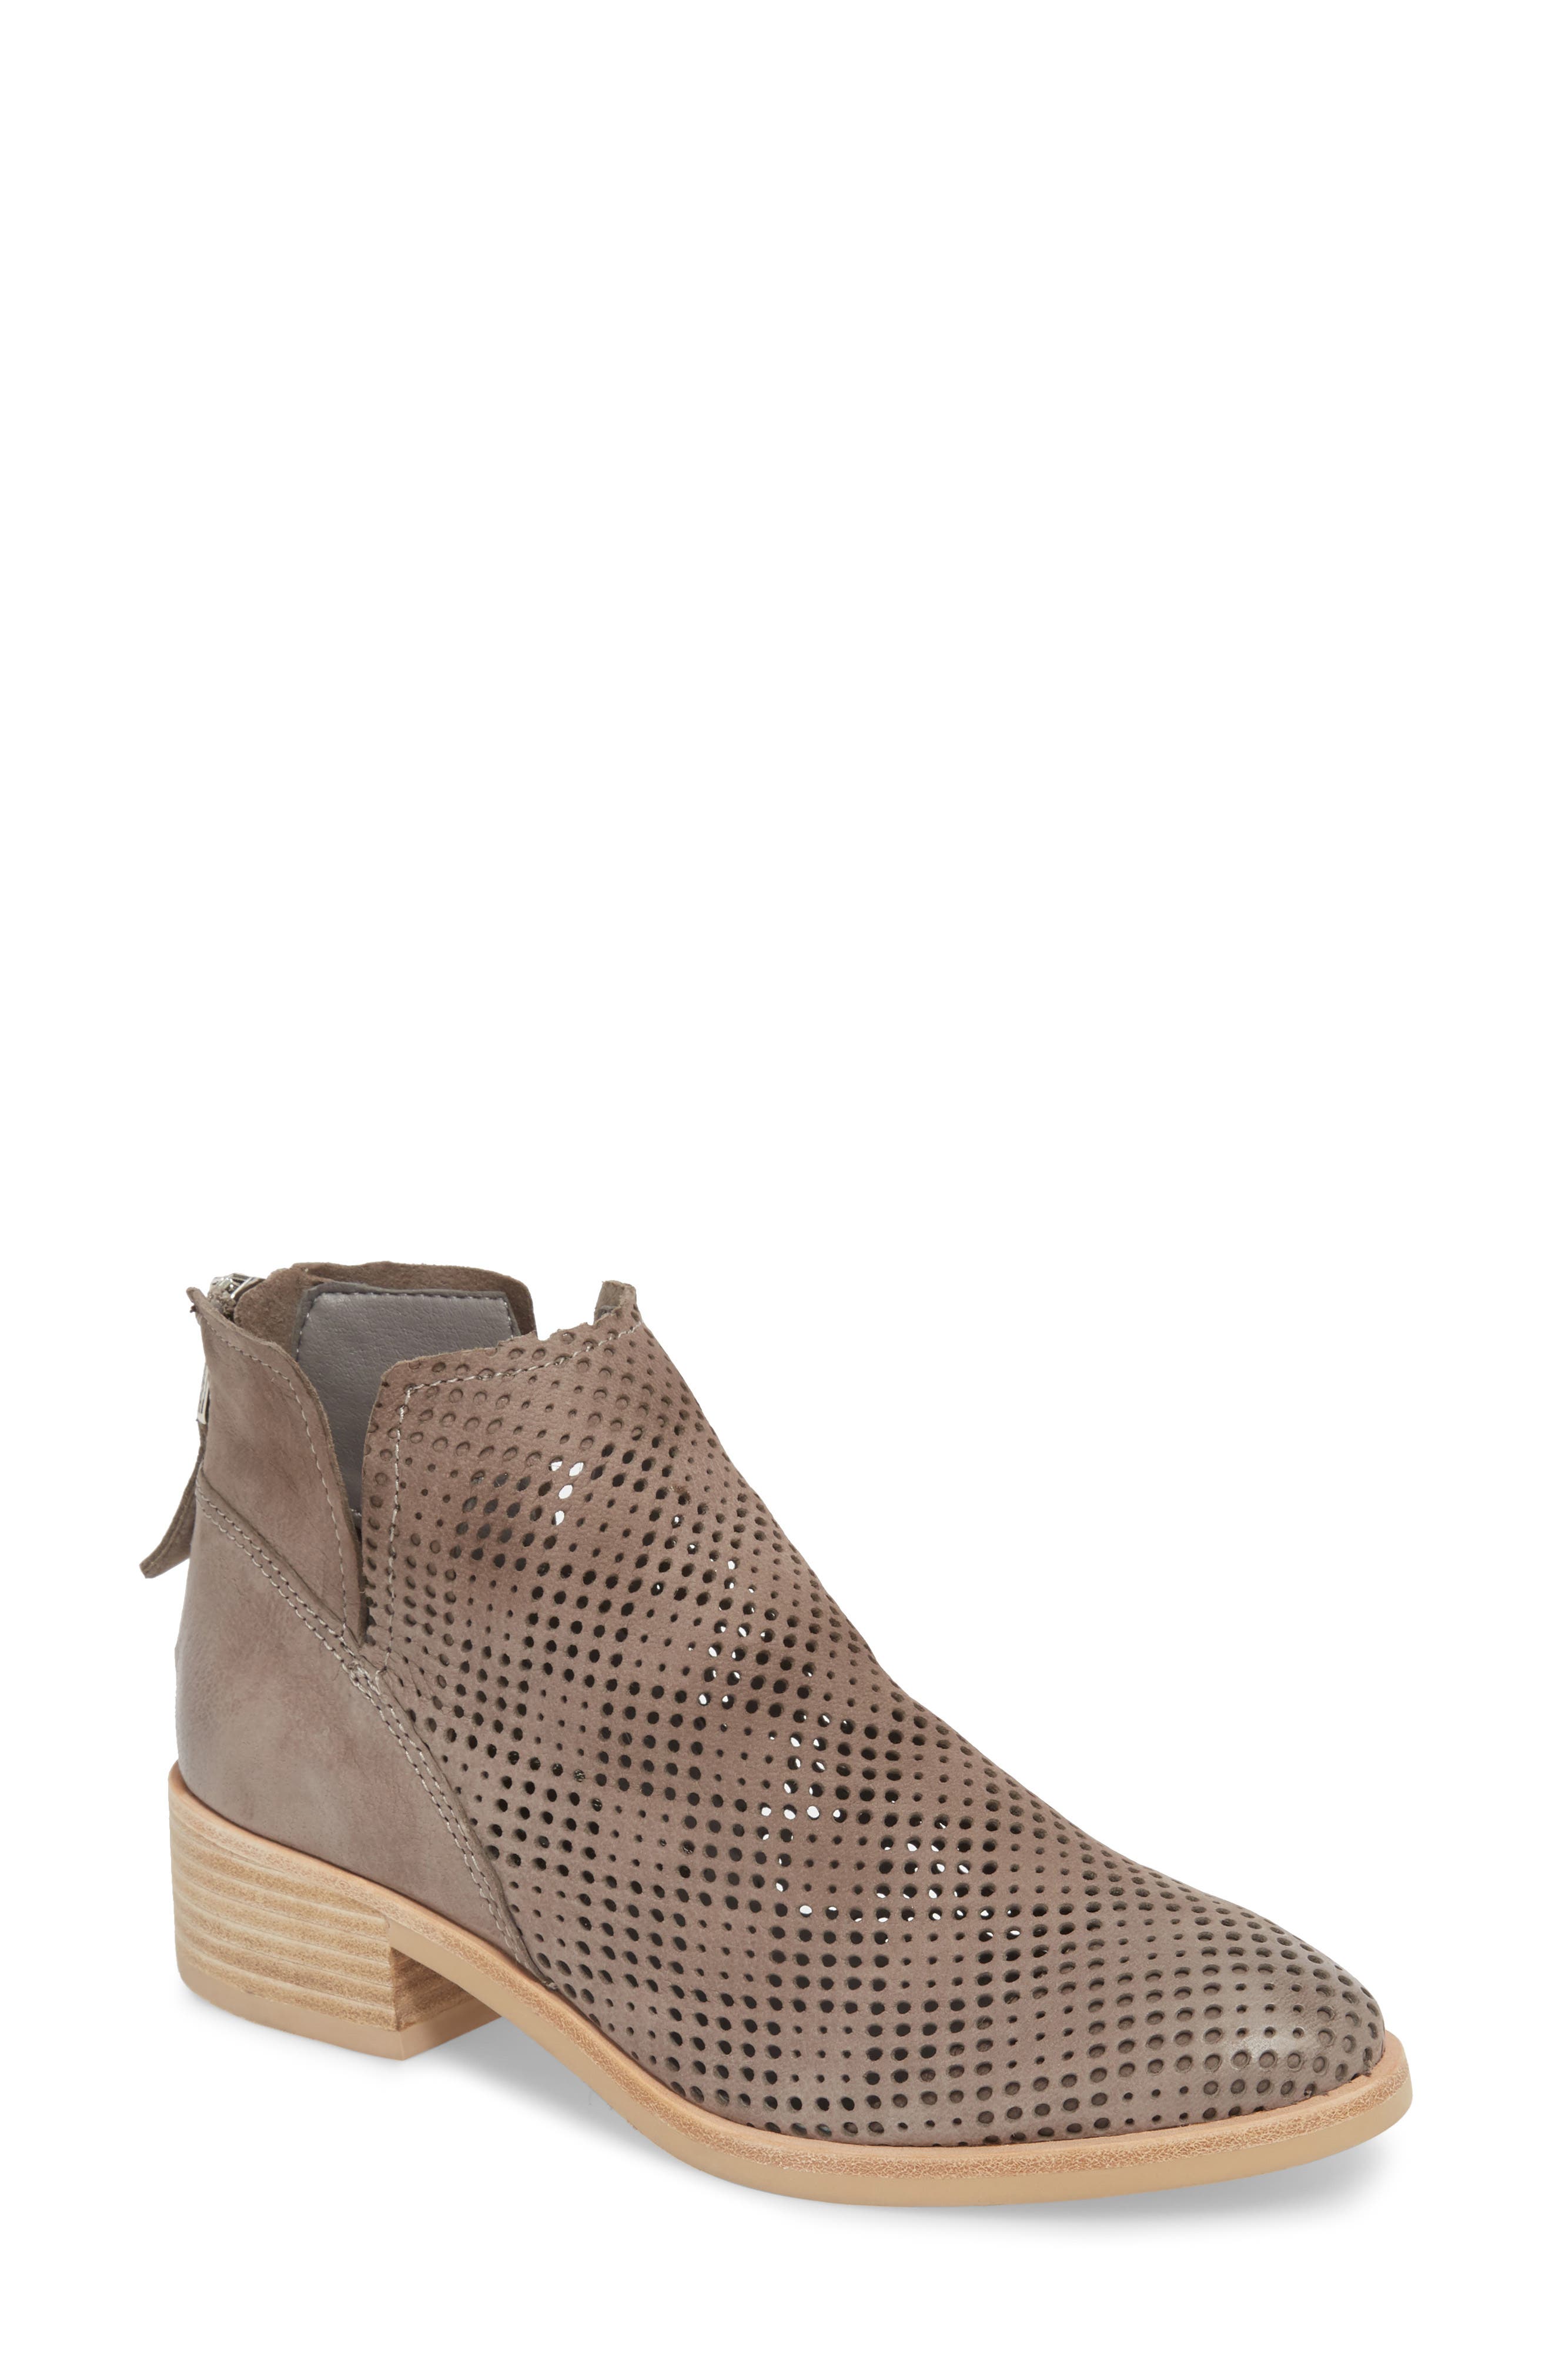 Dolce Vita | Tommi Perforated Bootie 